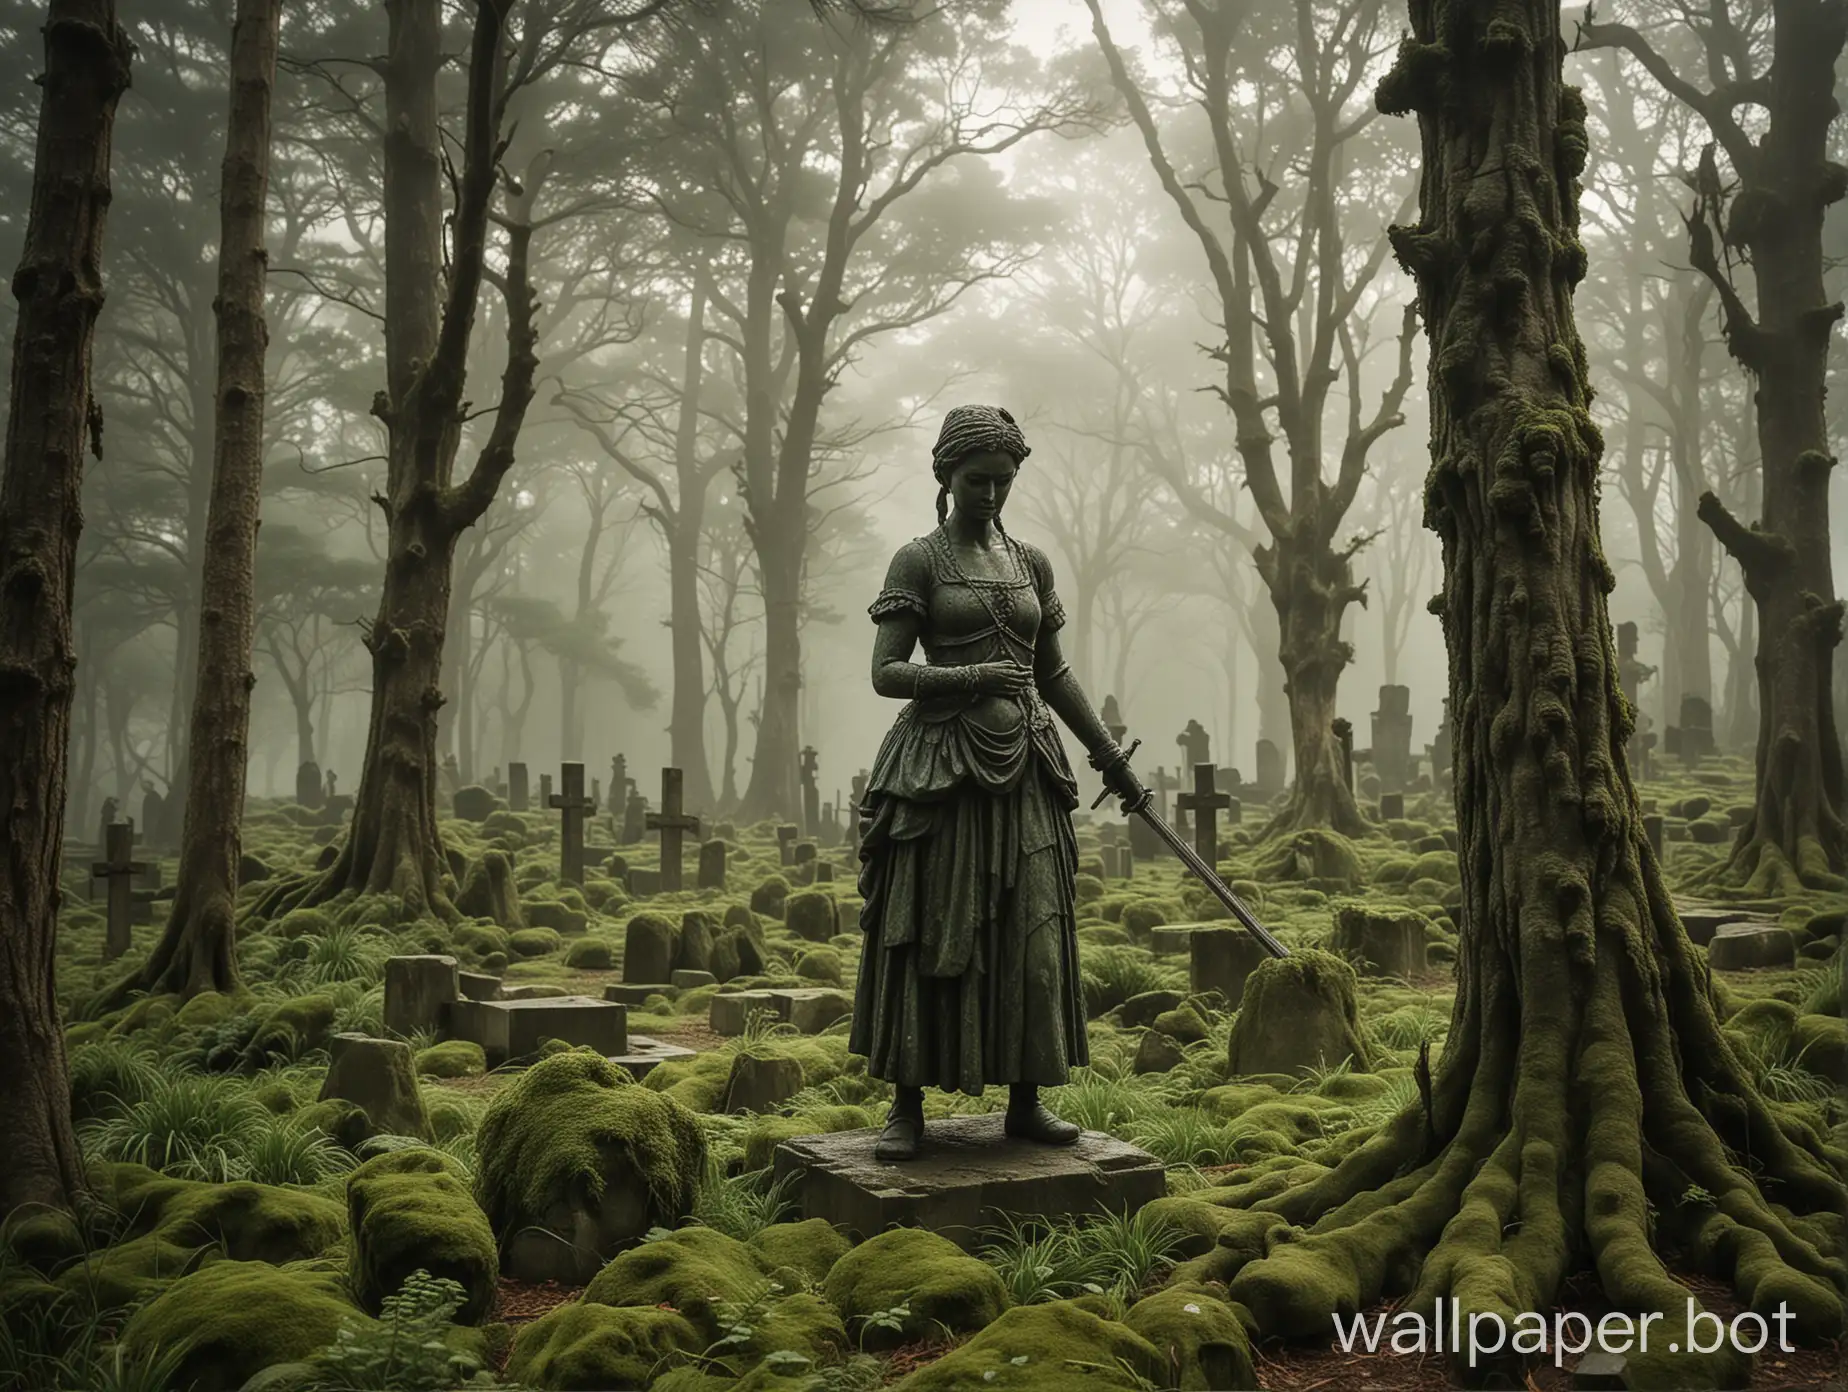 gloomy image of a large green and ancient garden with many ancient pine trees with dark and damp trunks with mosses, antique concrete full body statue with mosses, of a screaming peasant girl, wearing 18th century clothes, wearing a pointed black crown on her head and wielding a black sword claymore at shoulder height,  A dark late afternoon, the sun disappearing on the horizon behind the serious statue, ground all grassy with mist, focus on the statue